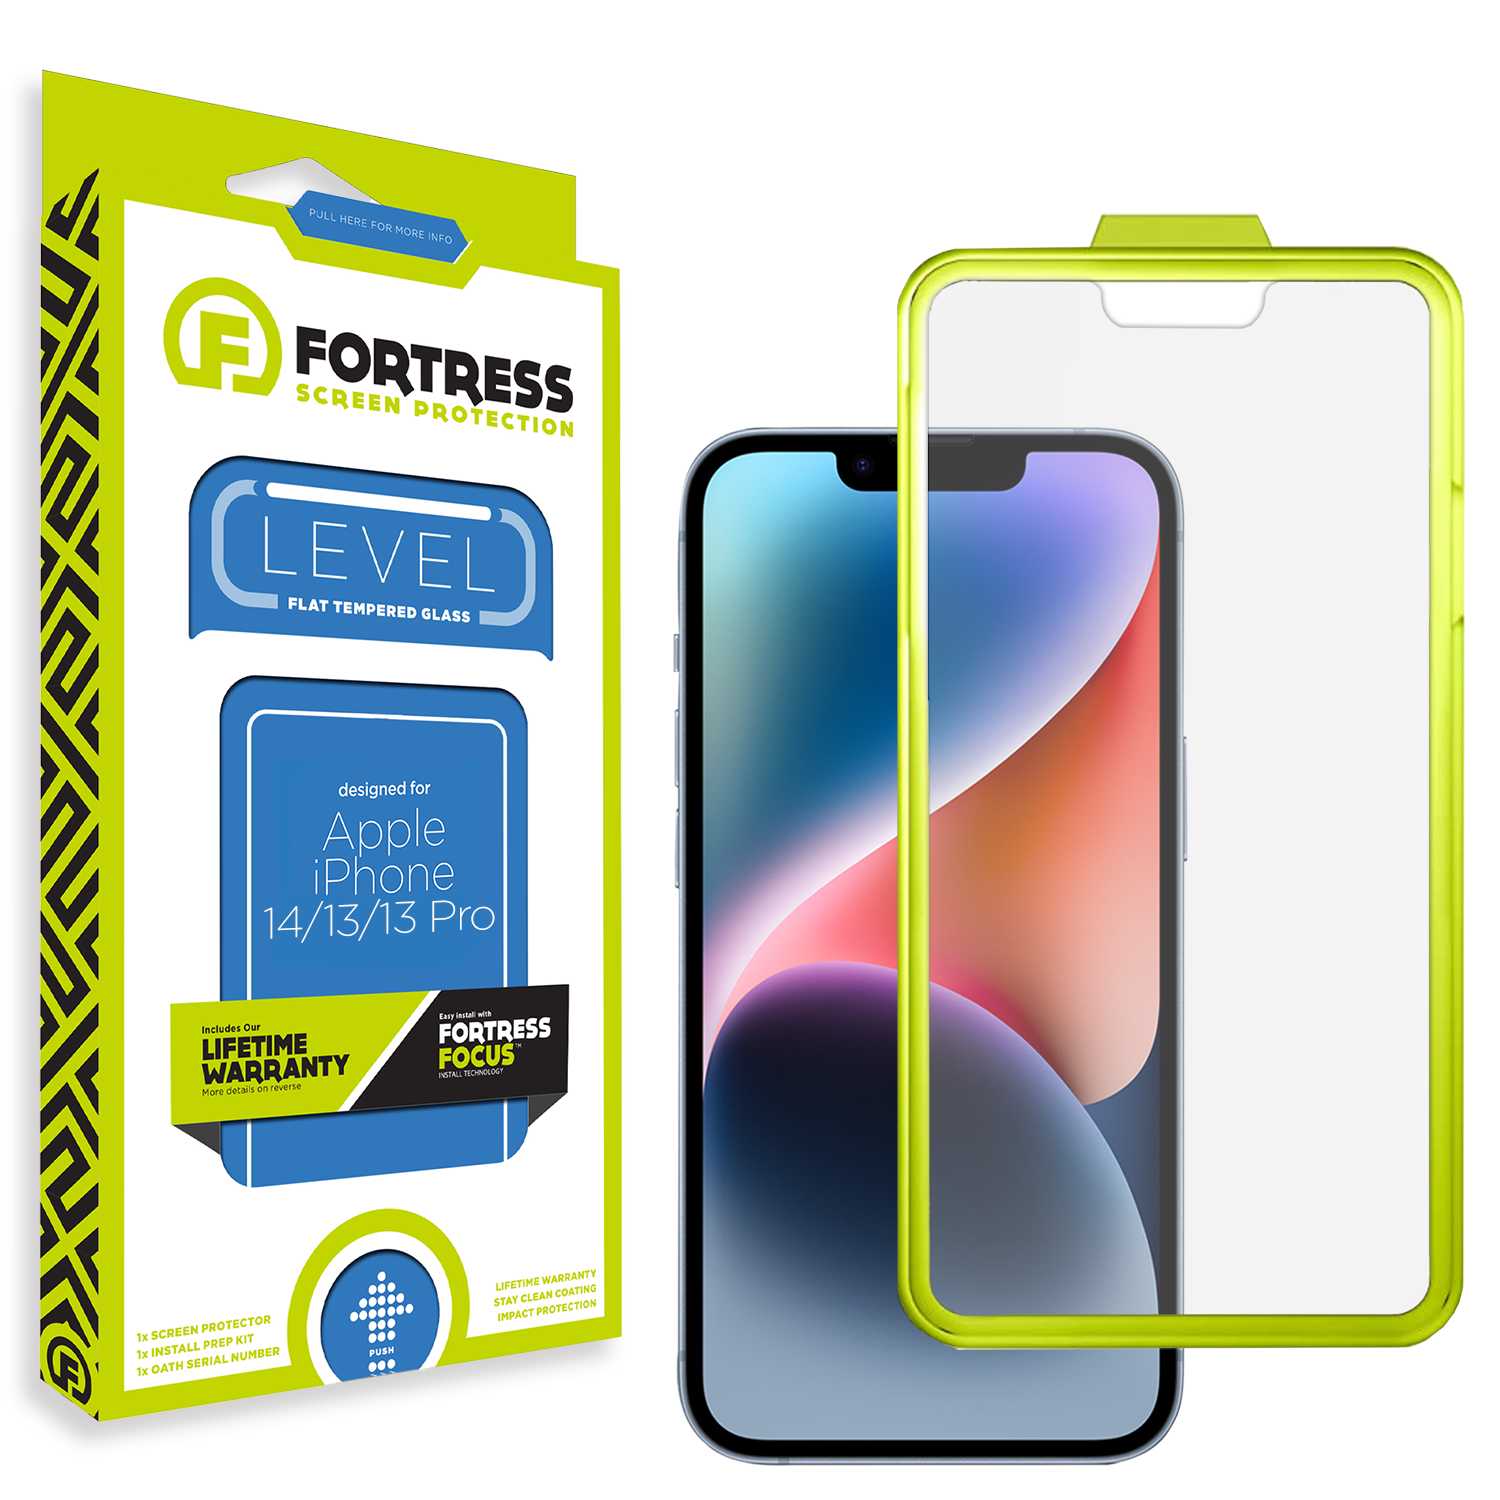 Fortress iPhone 14 Screen Protector $0CoverageInstallTool Scooch Screen Protector